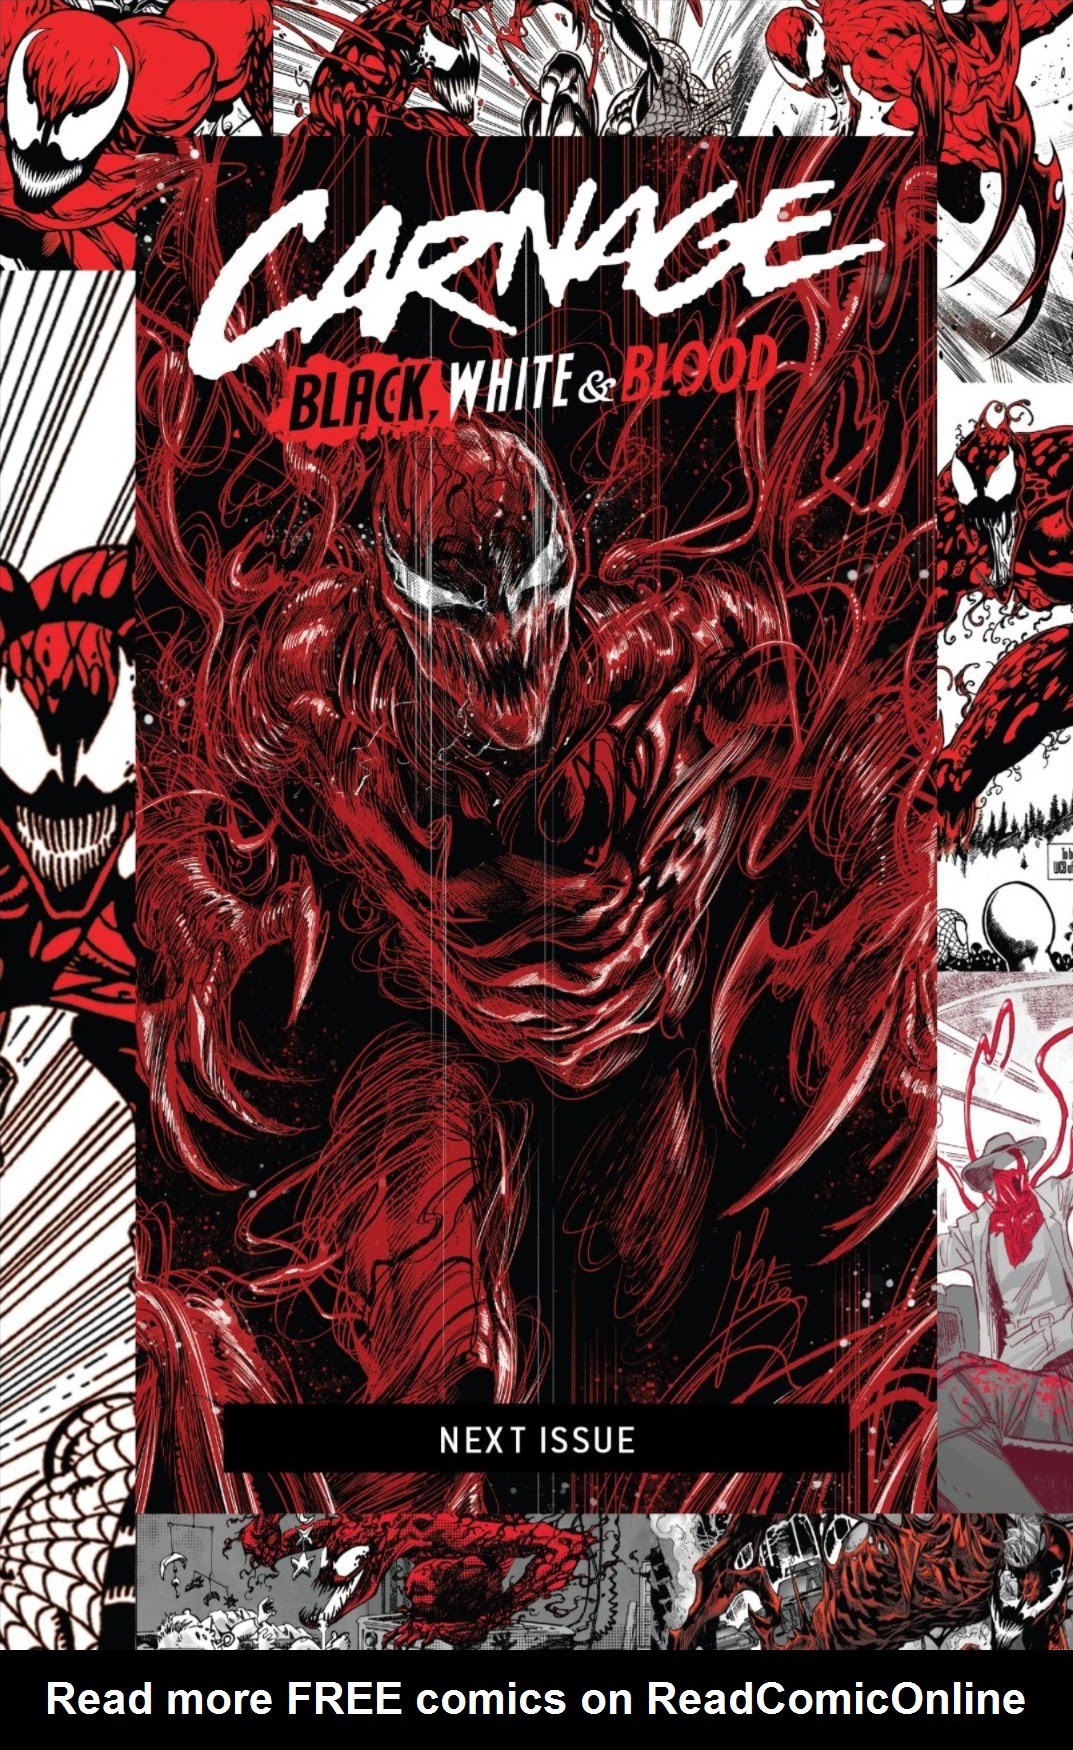 Read online Carnage: Black, White & Blood comic -  Issue #1 - 34